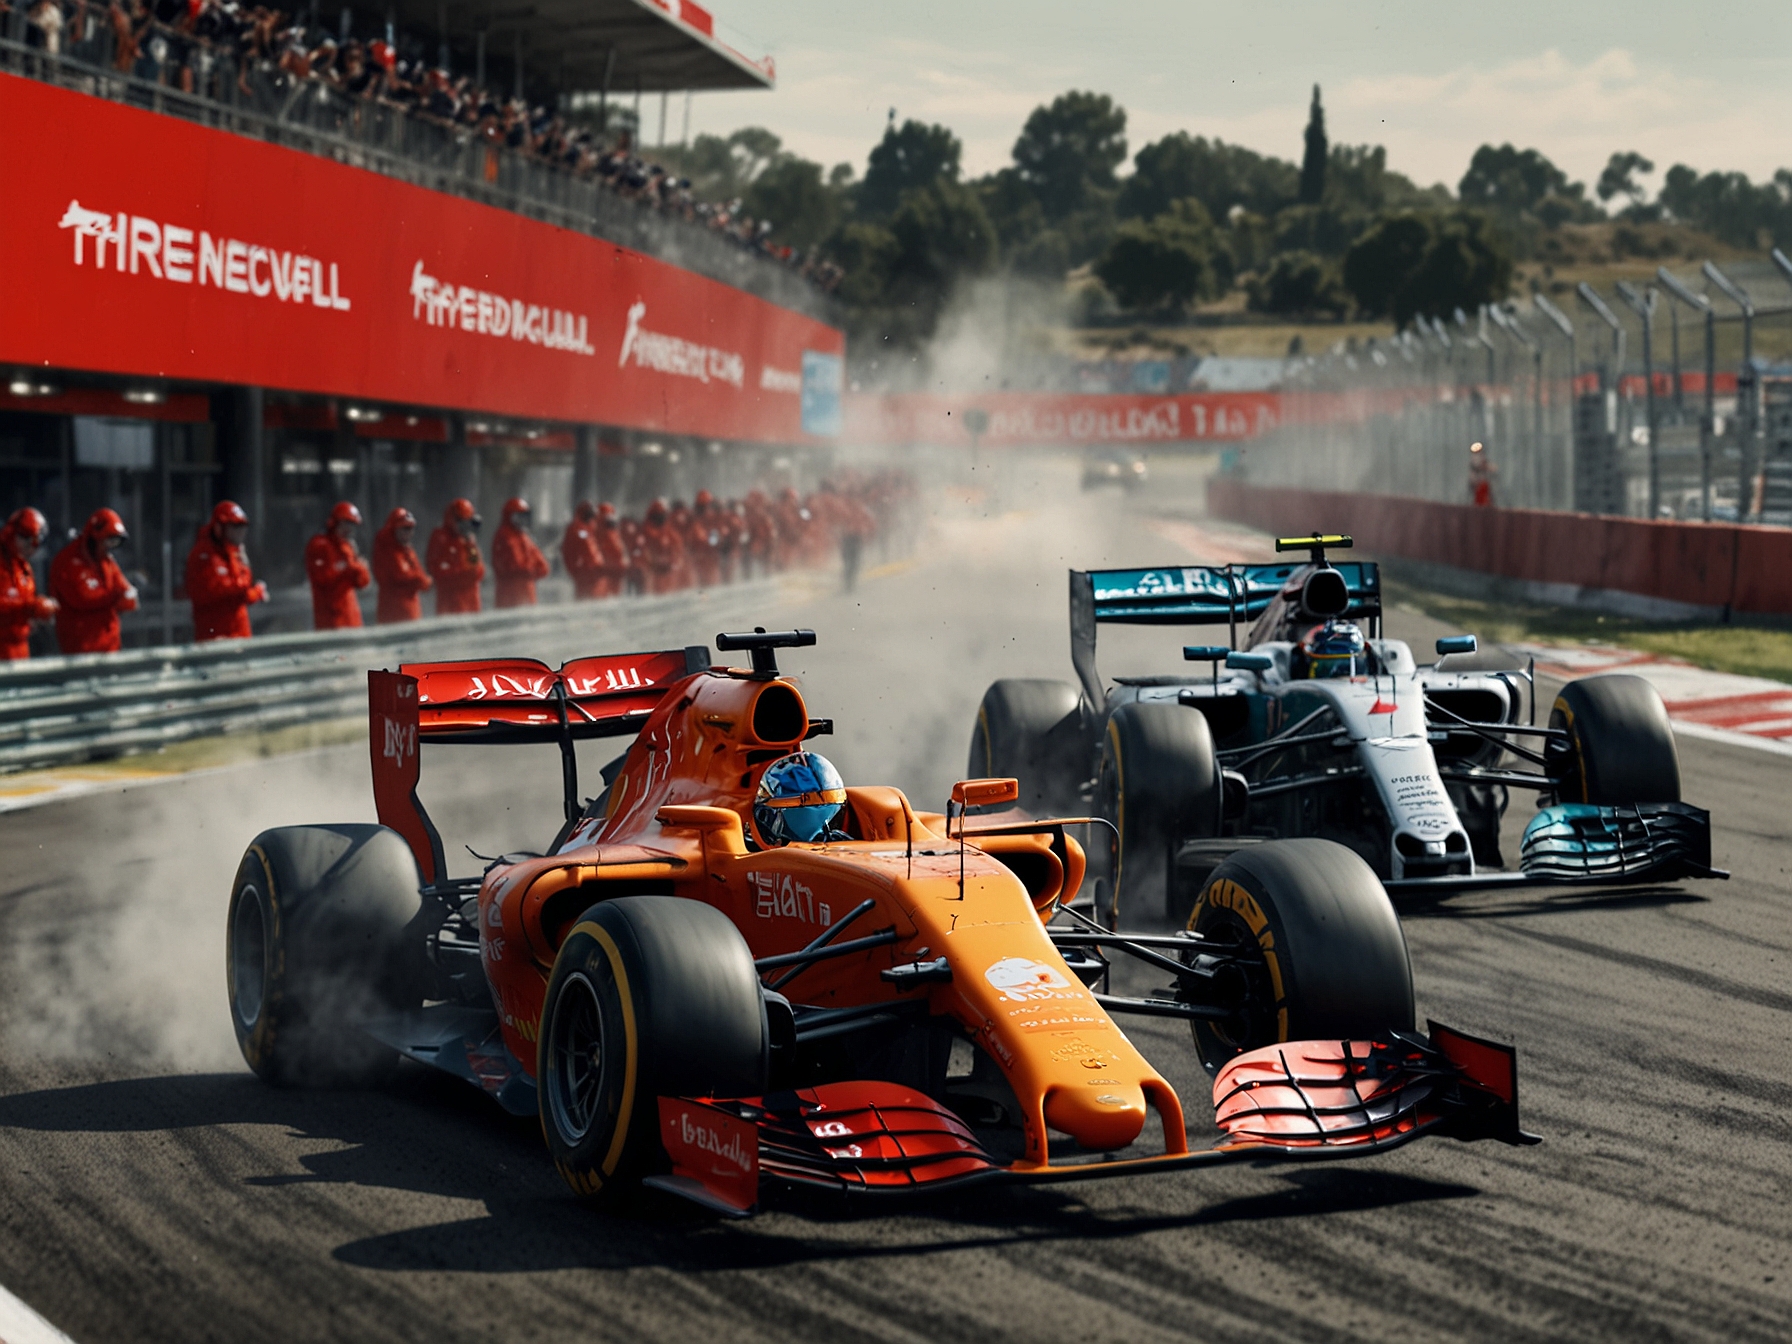 A competitive scene featuring cars from Red Bull Racing, McLaren, Ferrari, and Mercedes on the Circuit de Catalunya, symbolizing the intense rivalry and tight competition.